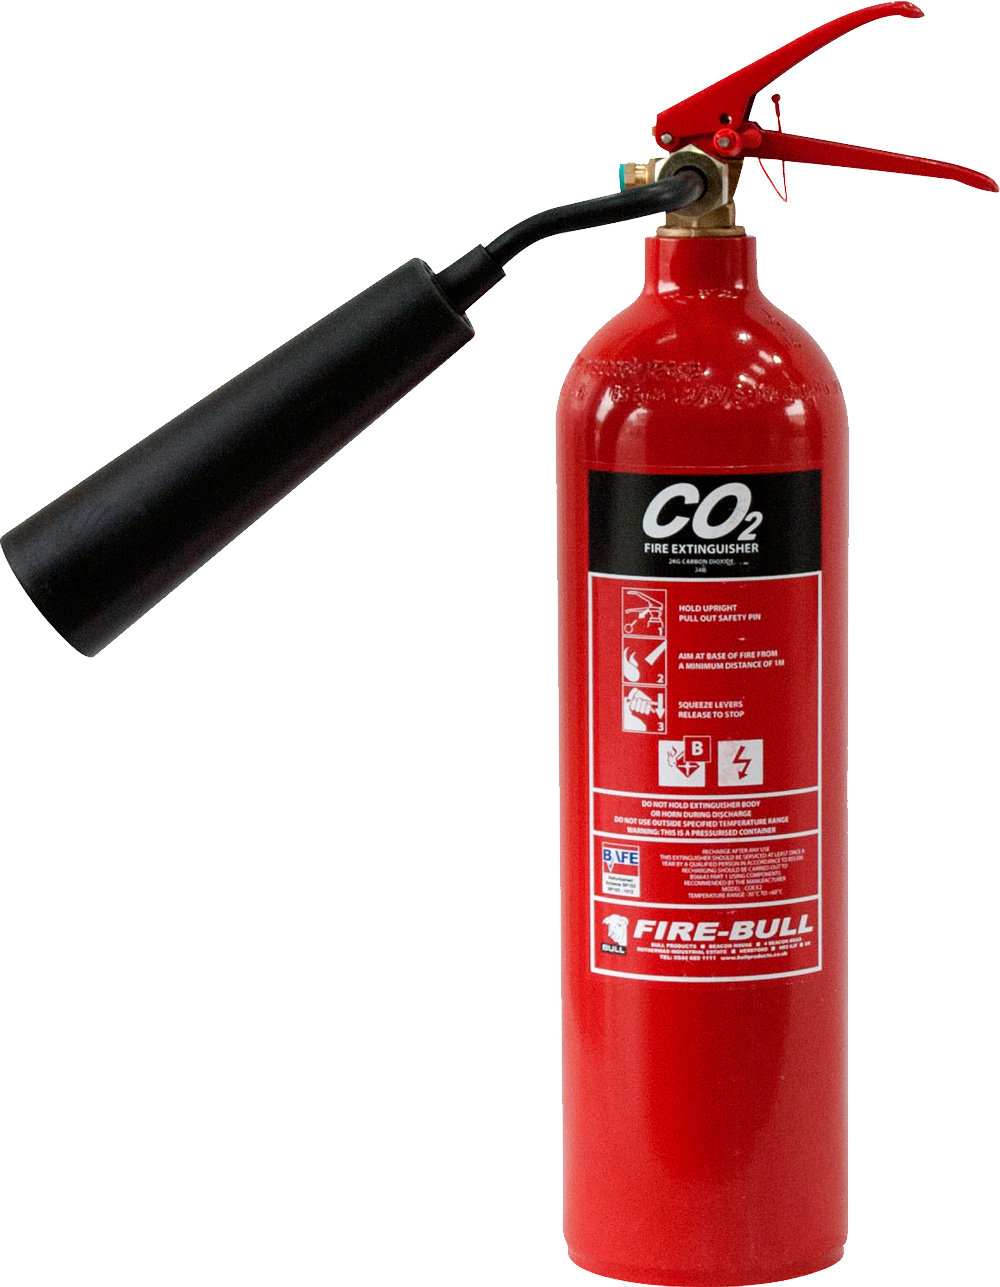 Firepower Fire Extinguisher PNG HD Quality